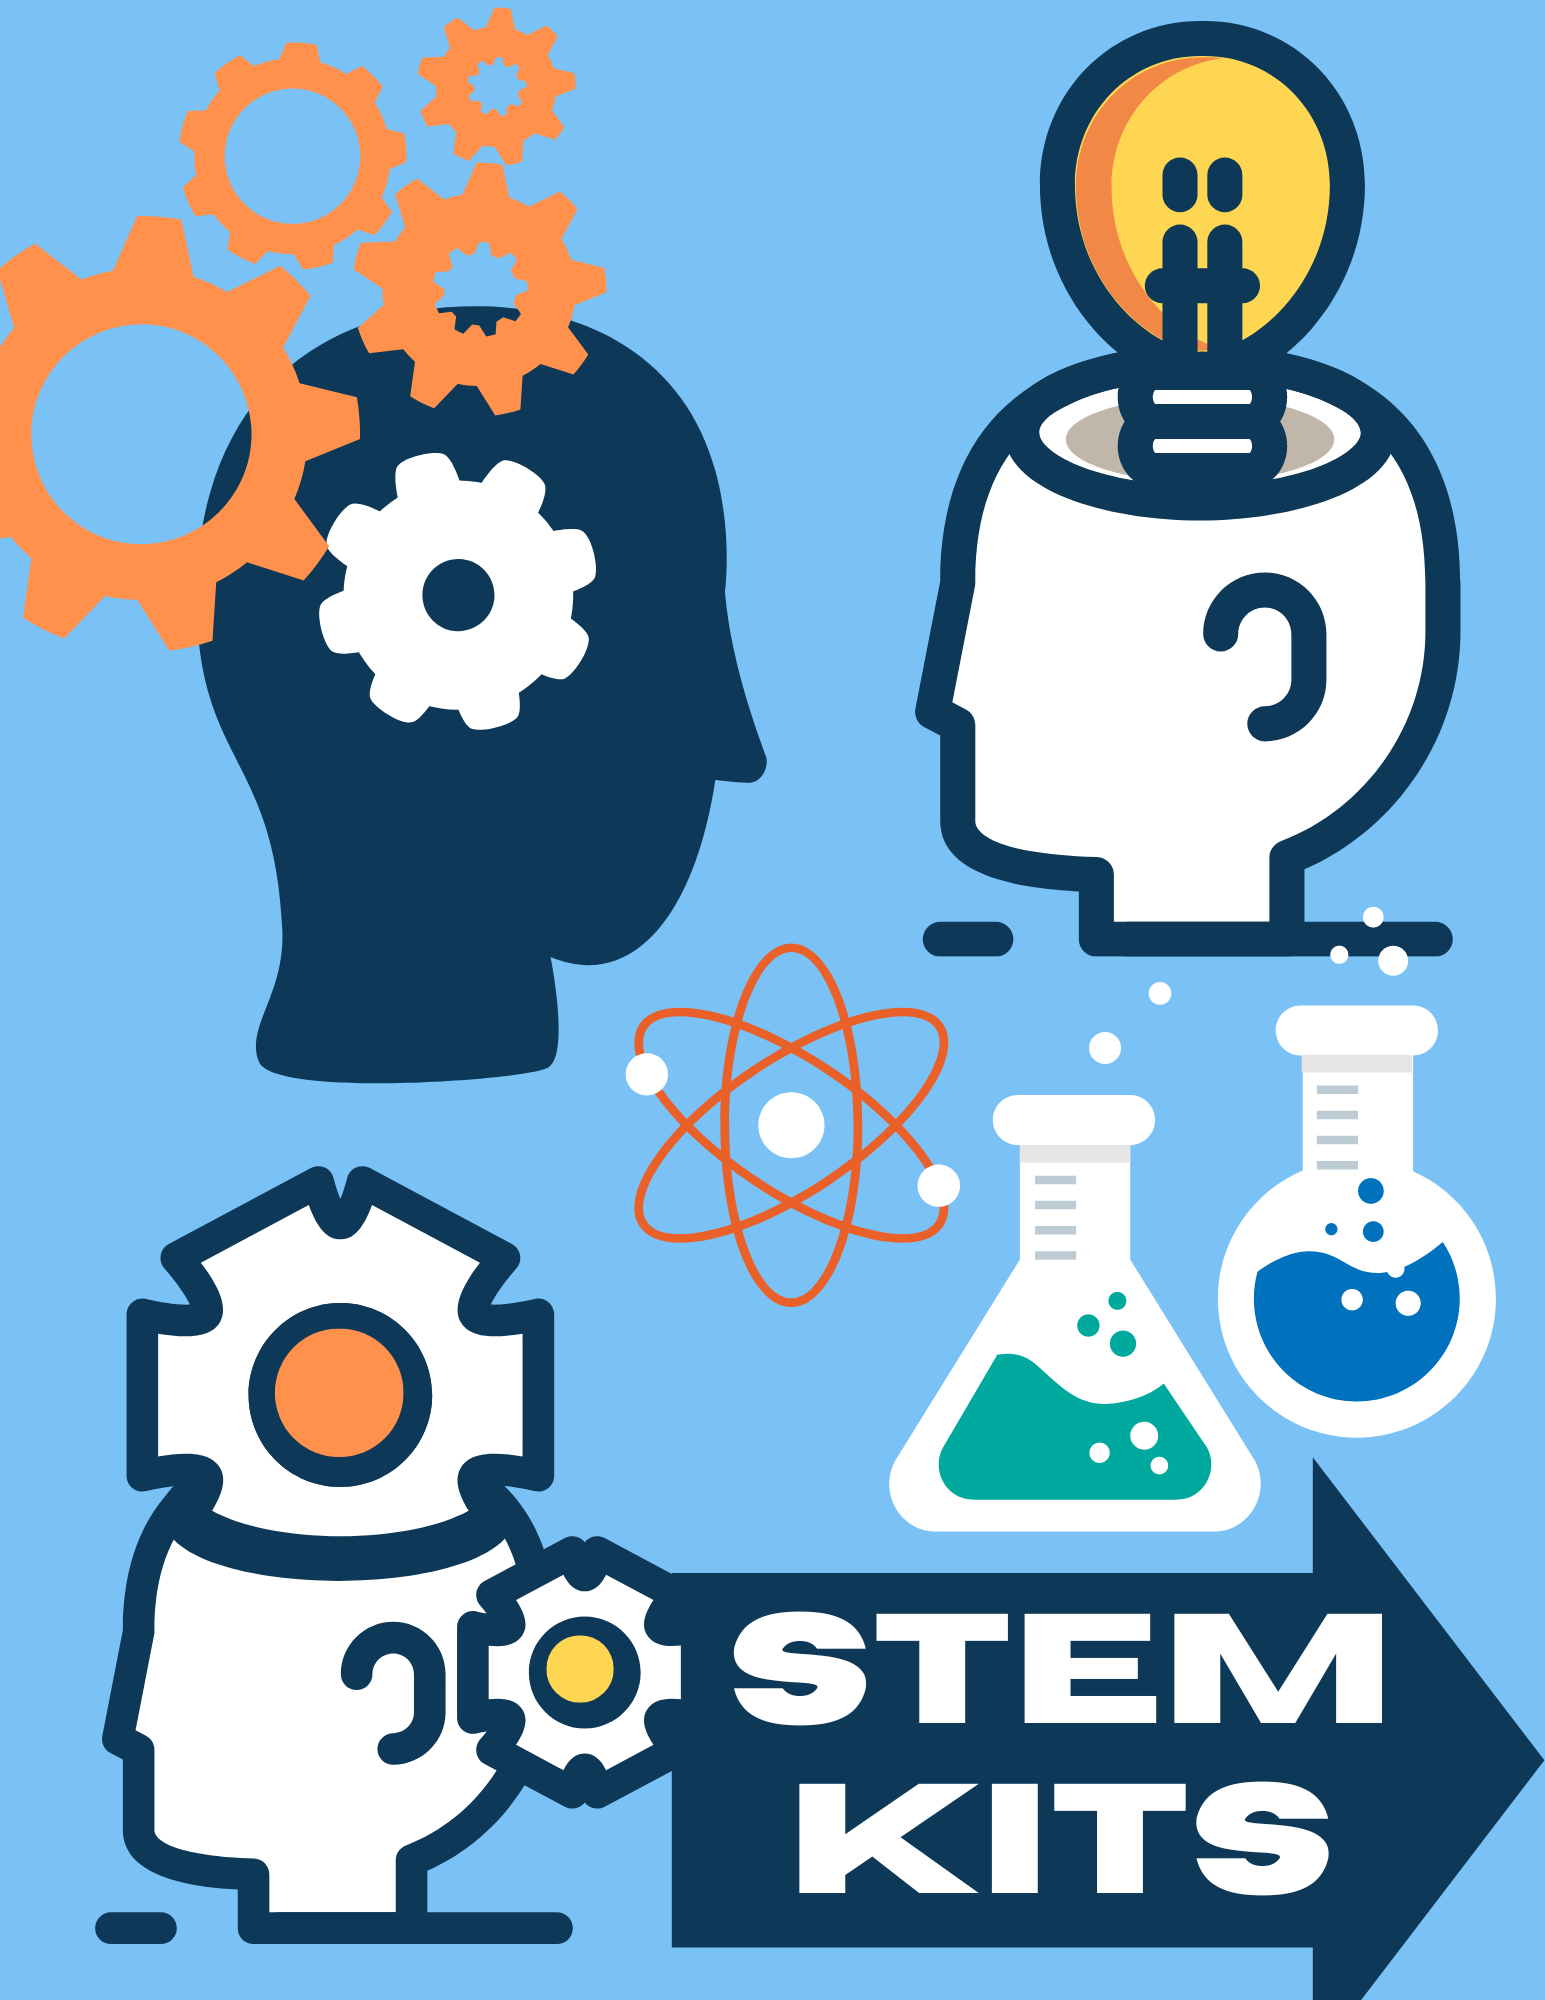 Graphics of heads, gears, chemistry, atom/molecule, light bulb indicating thinking and STEM activities